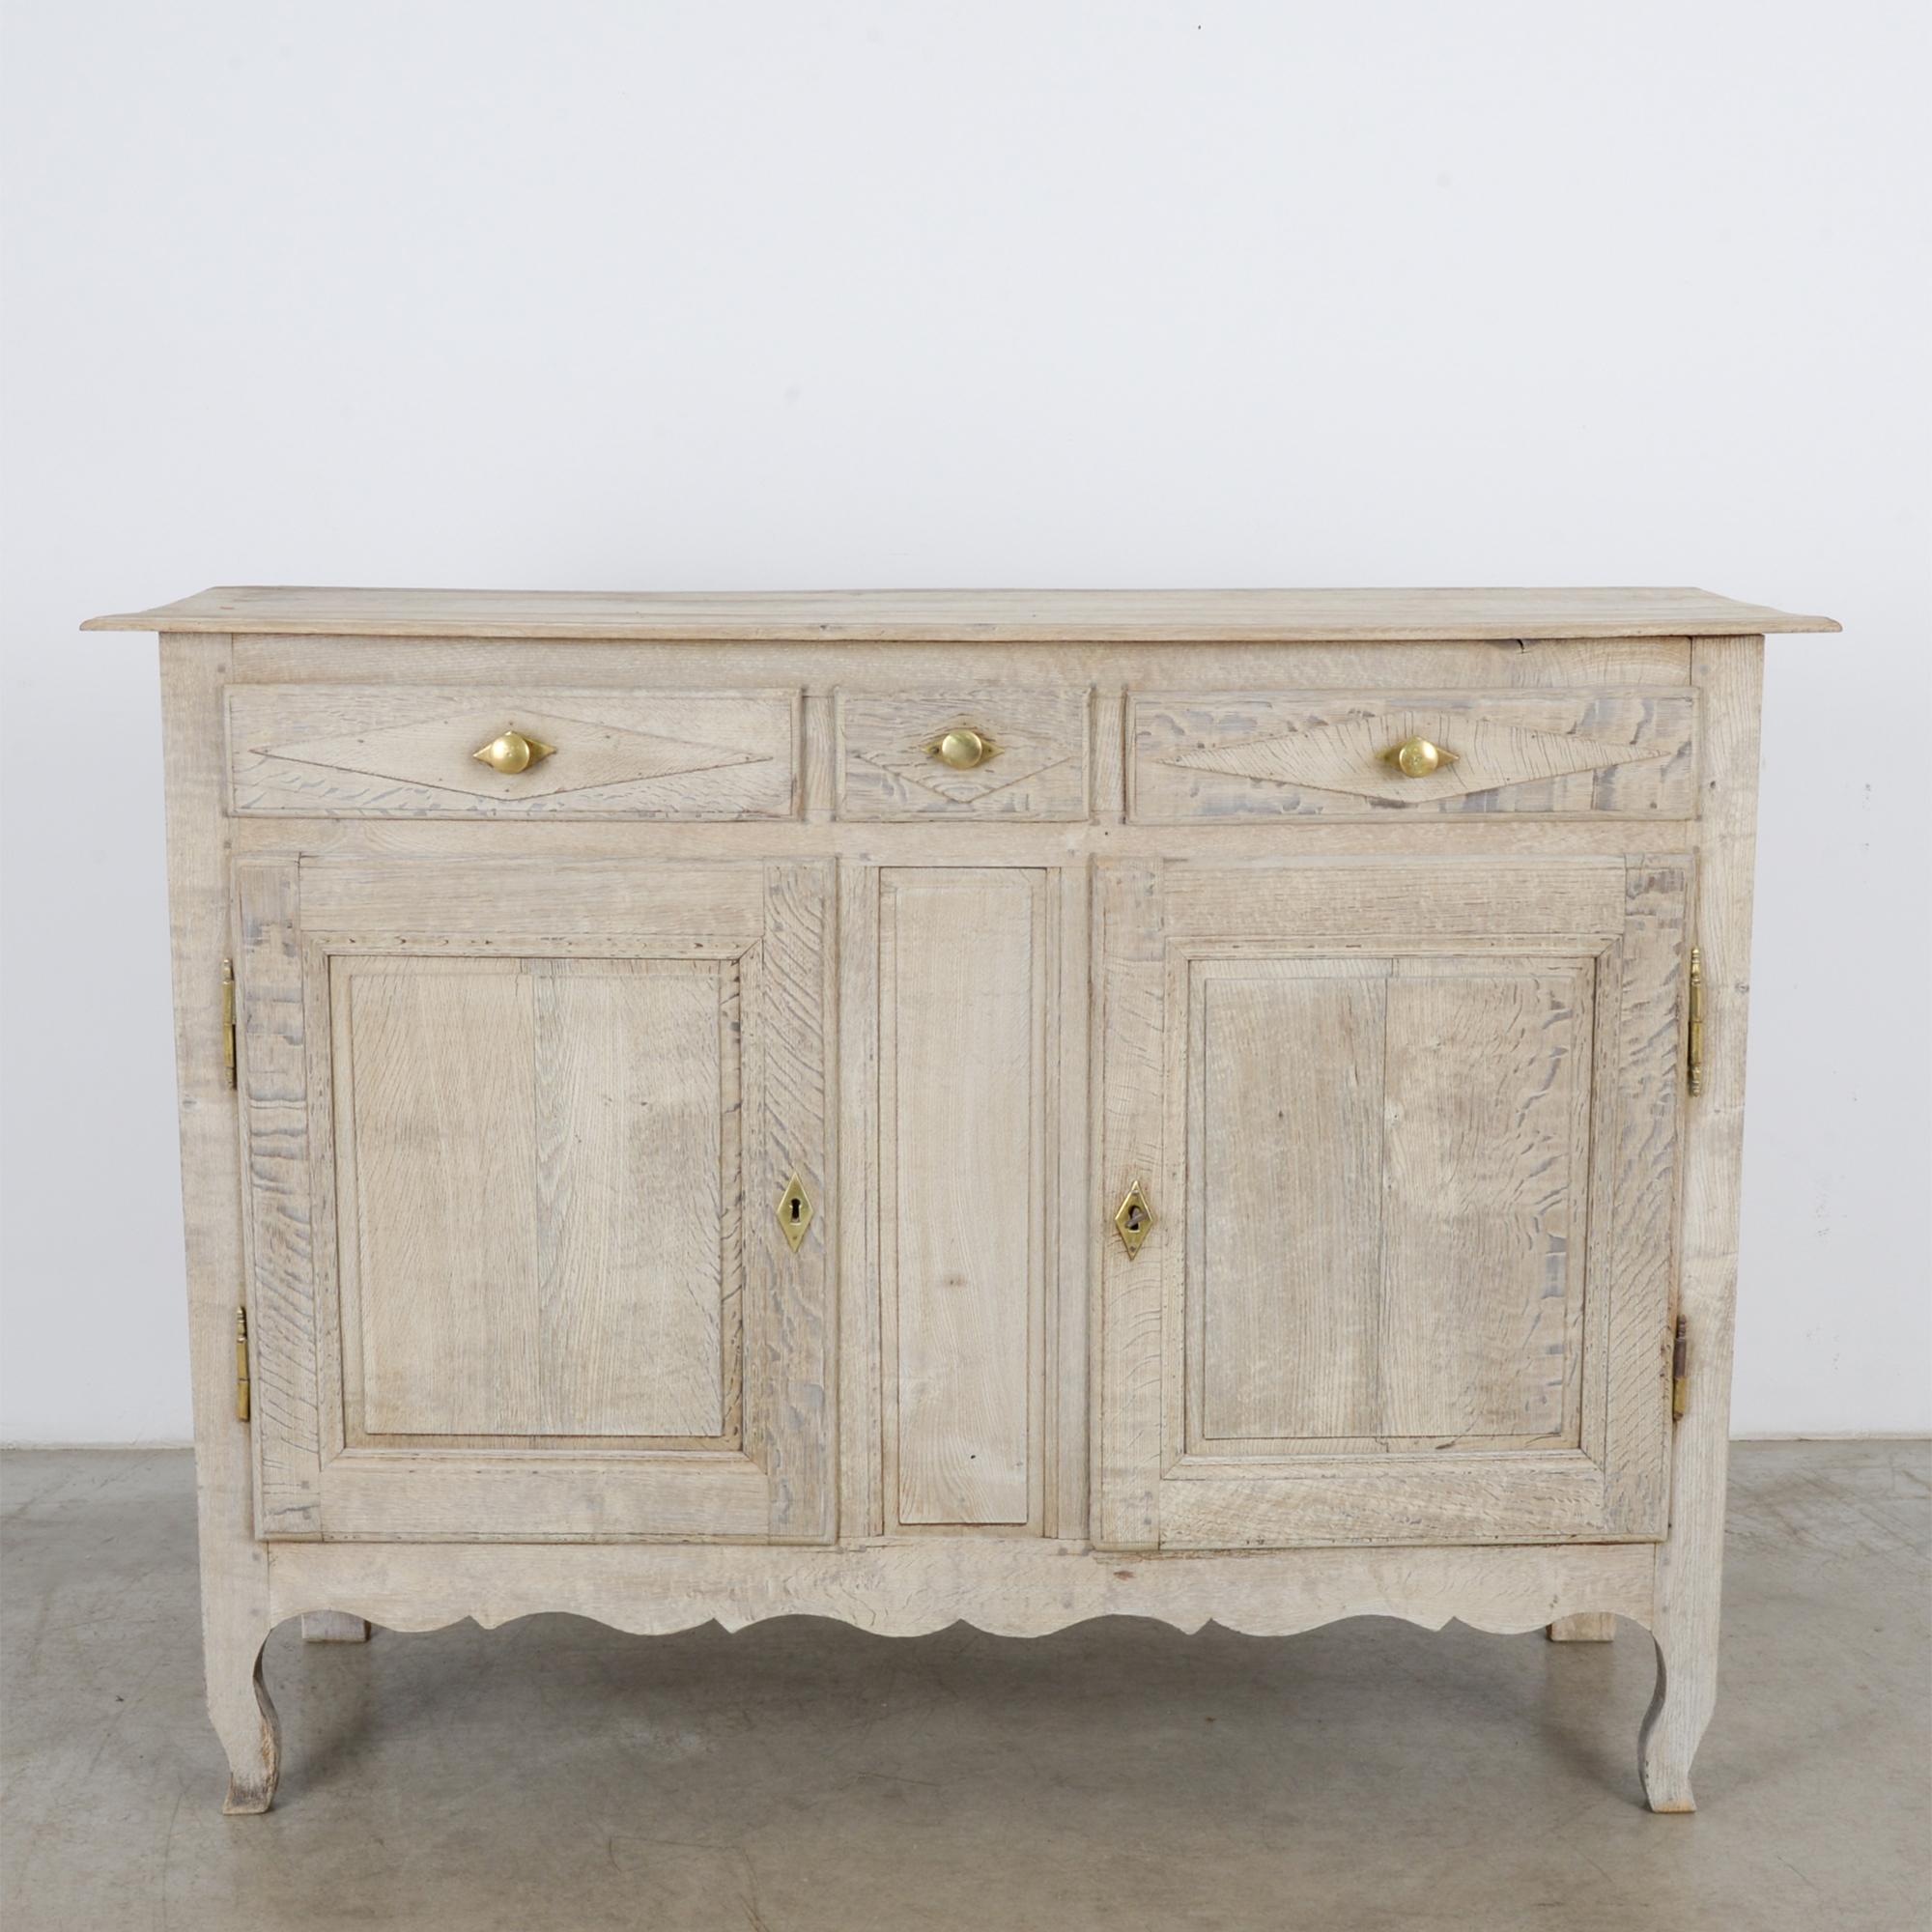 A 19th century French oak buffet cabinet. This vintage buffet has plenty of room with two doors and three drawers featuring casted bronze knobs for a clean finish that accentuates the grain of the bleached oak. A beautiful sturdy piece that’ll add a